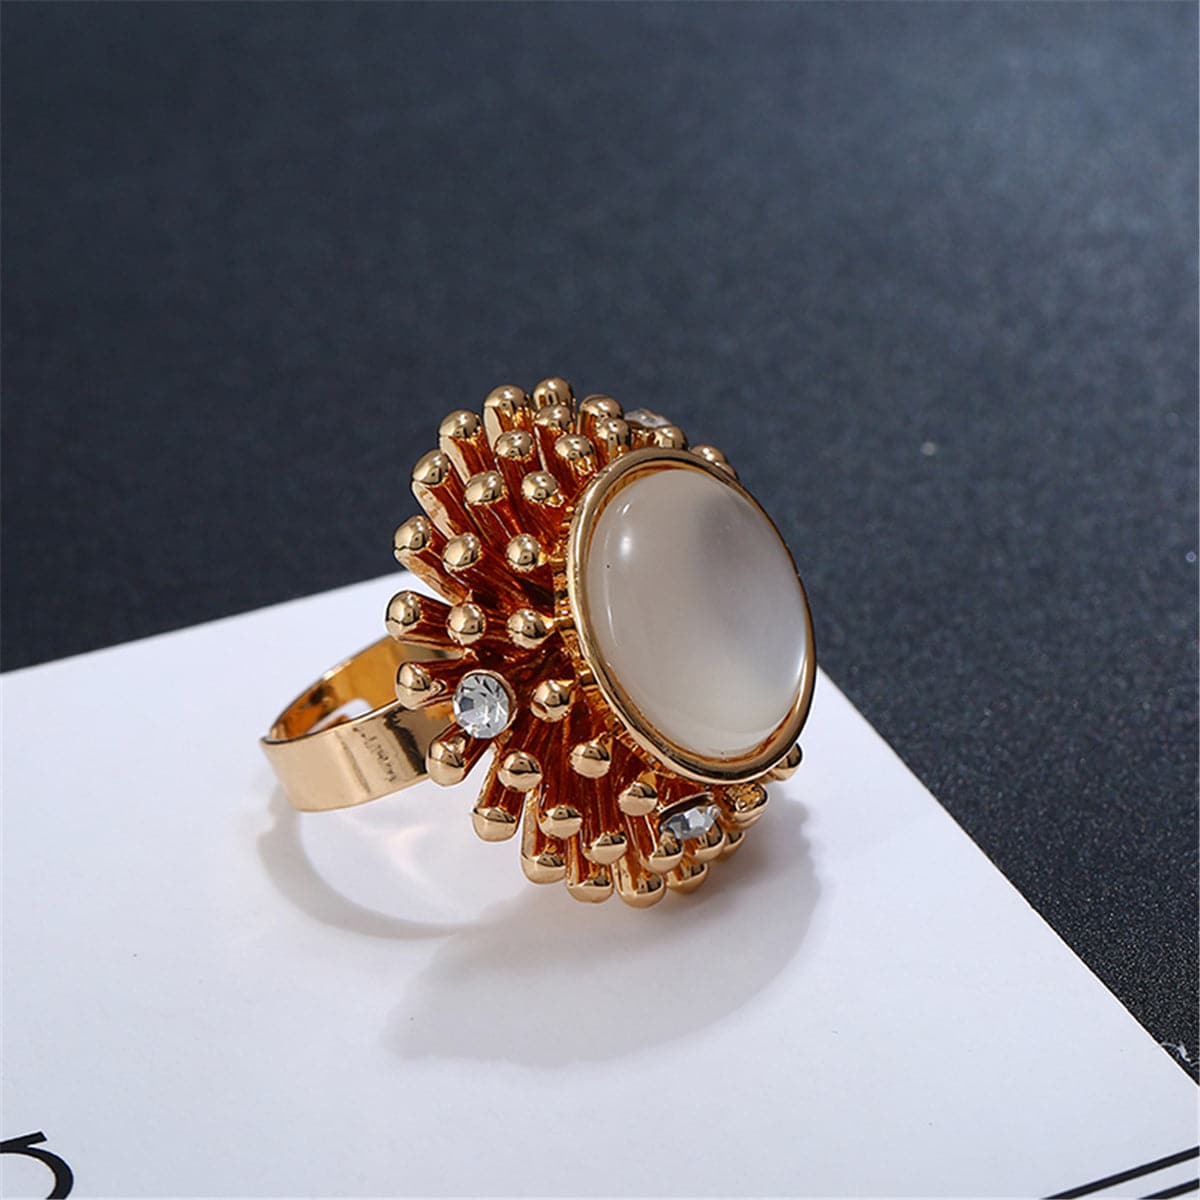 Resin & Cubic Zirconia 18k Gold-Plated Flower Ring